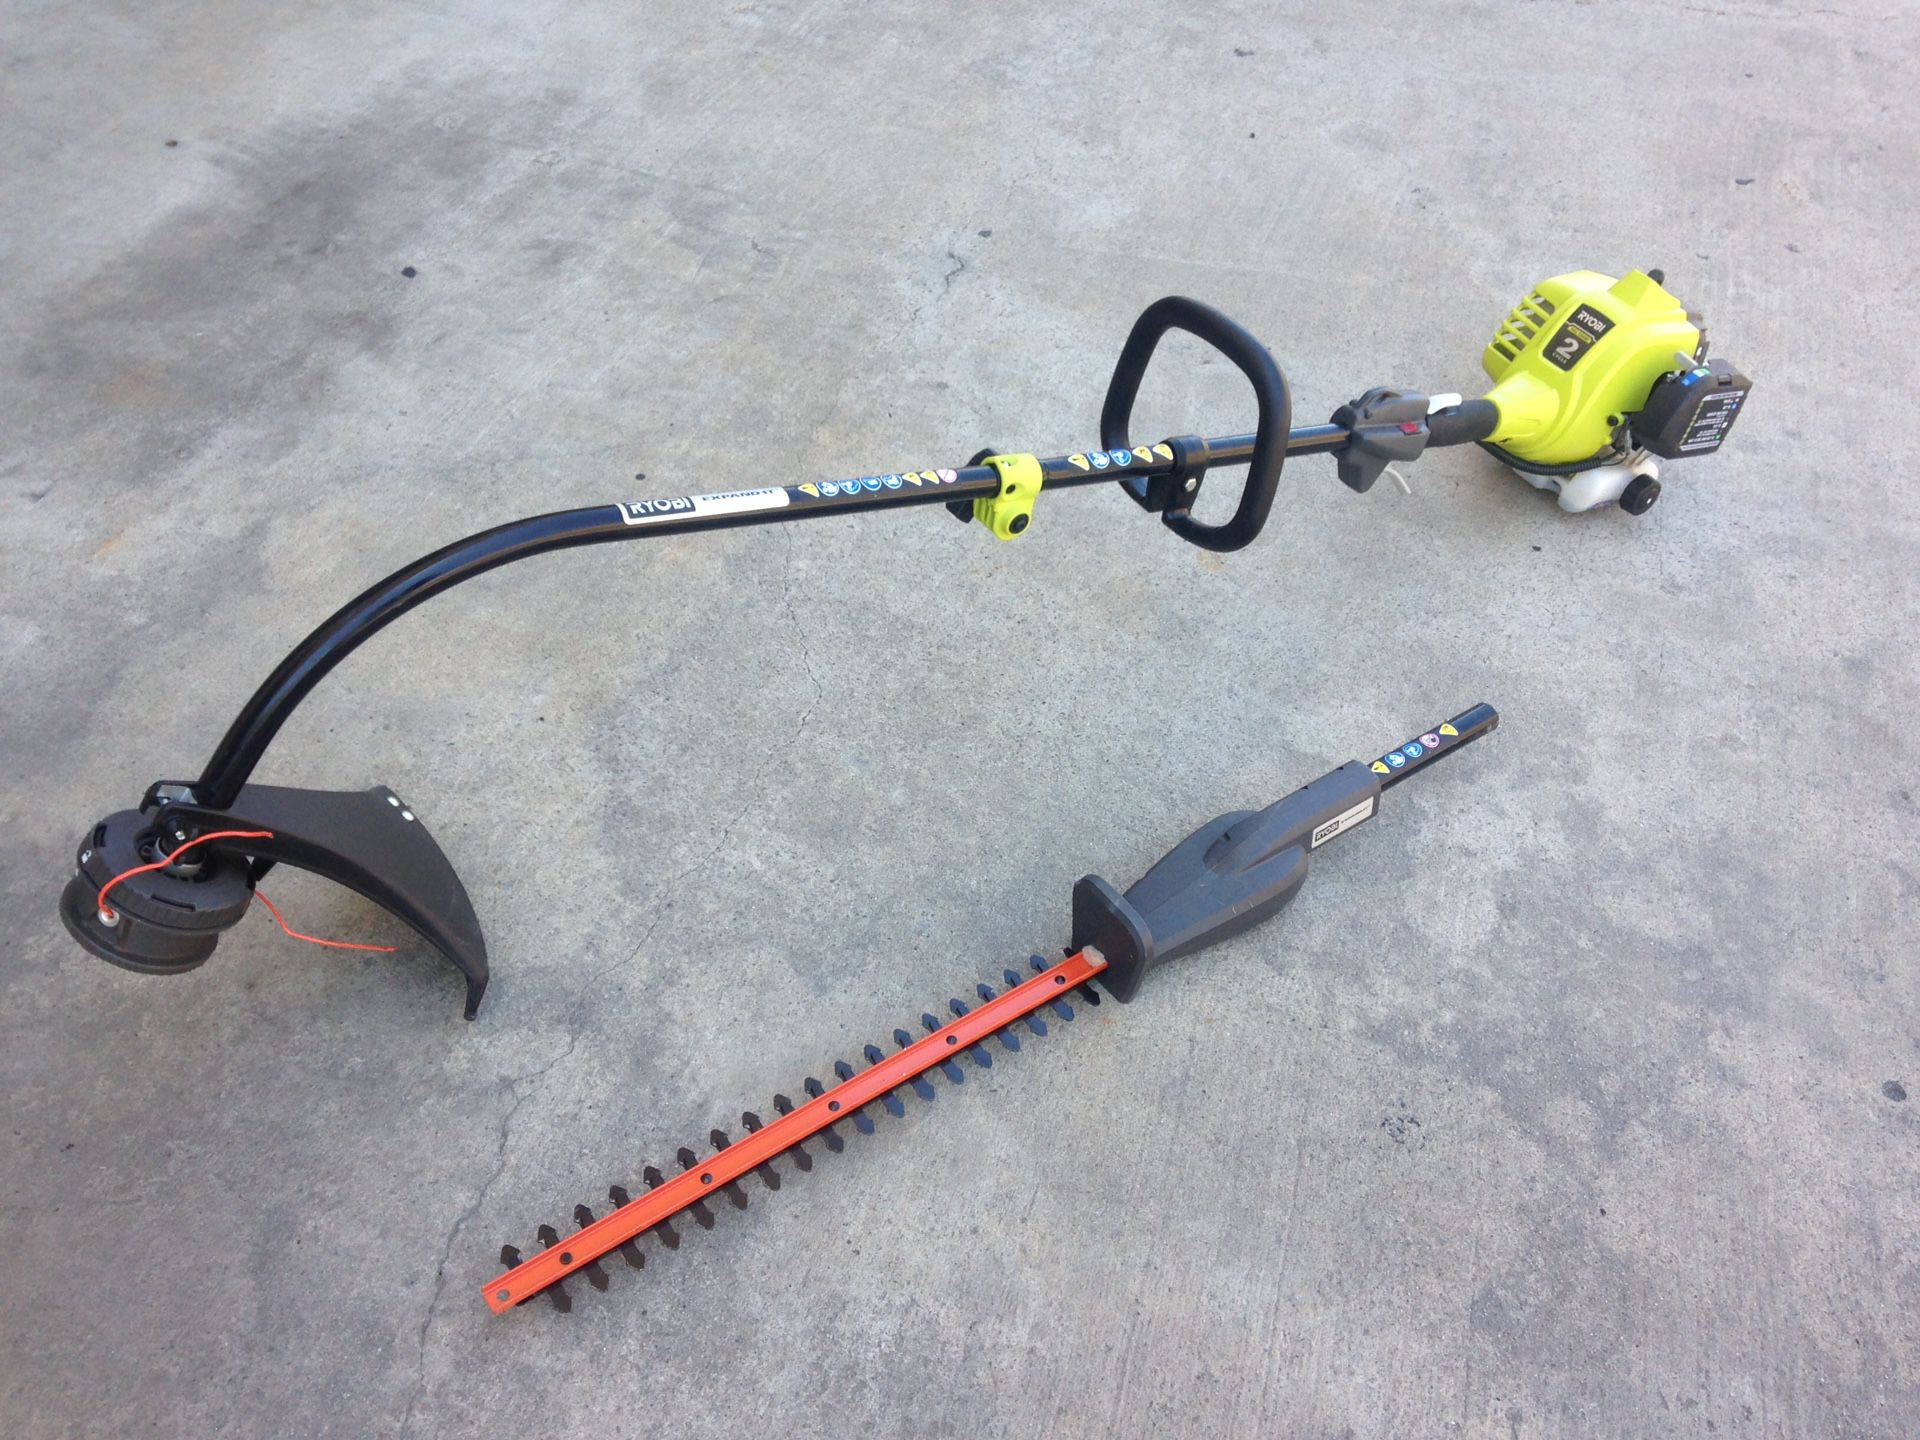 Ryobi gas weed eater and hedger attachment tools